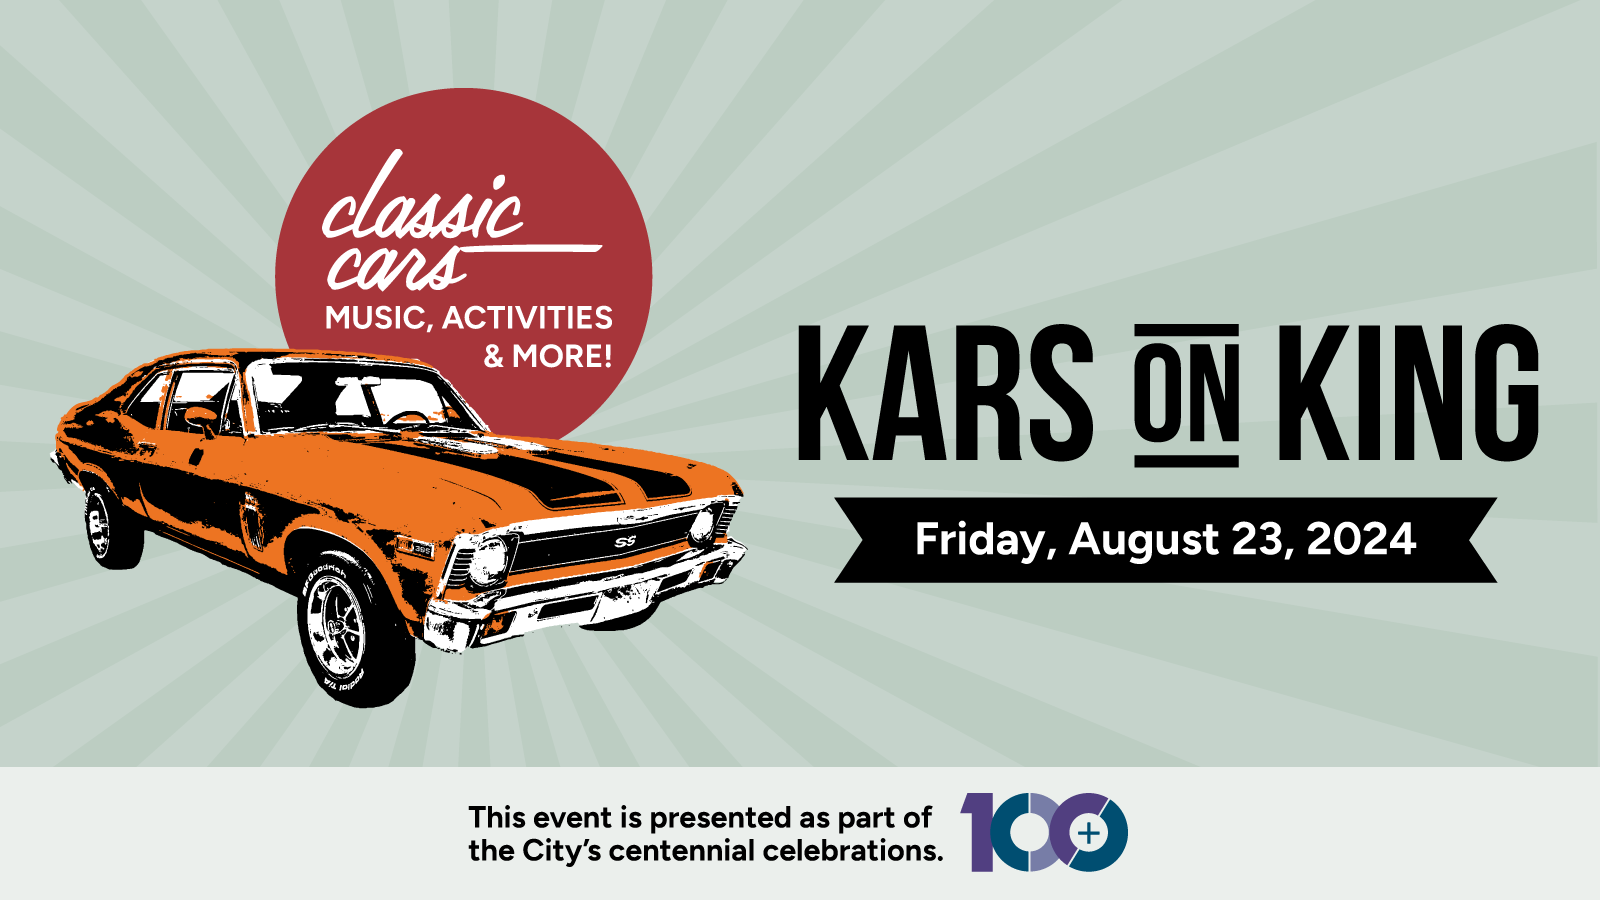 Kars on King - Classic cars, music, activities & more! Friday, August 23, 2024. This event is presented as part of the City's centennial celebration. 100+